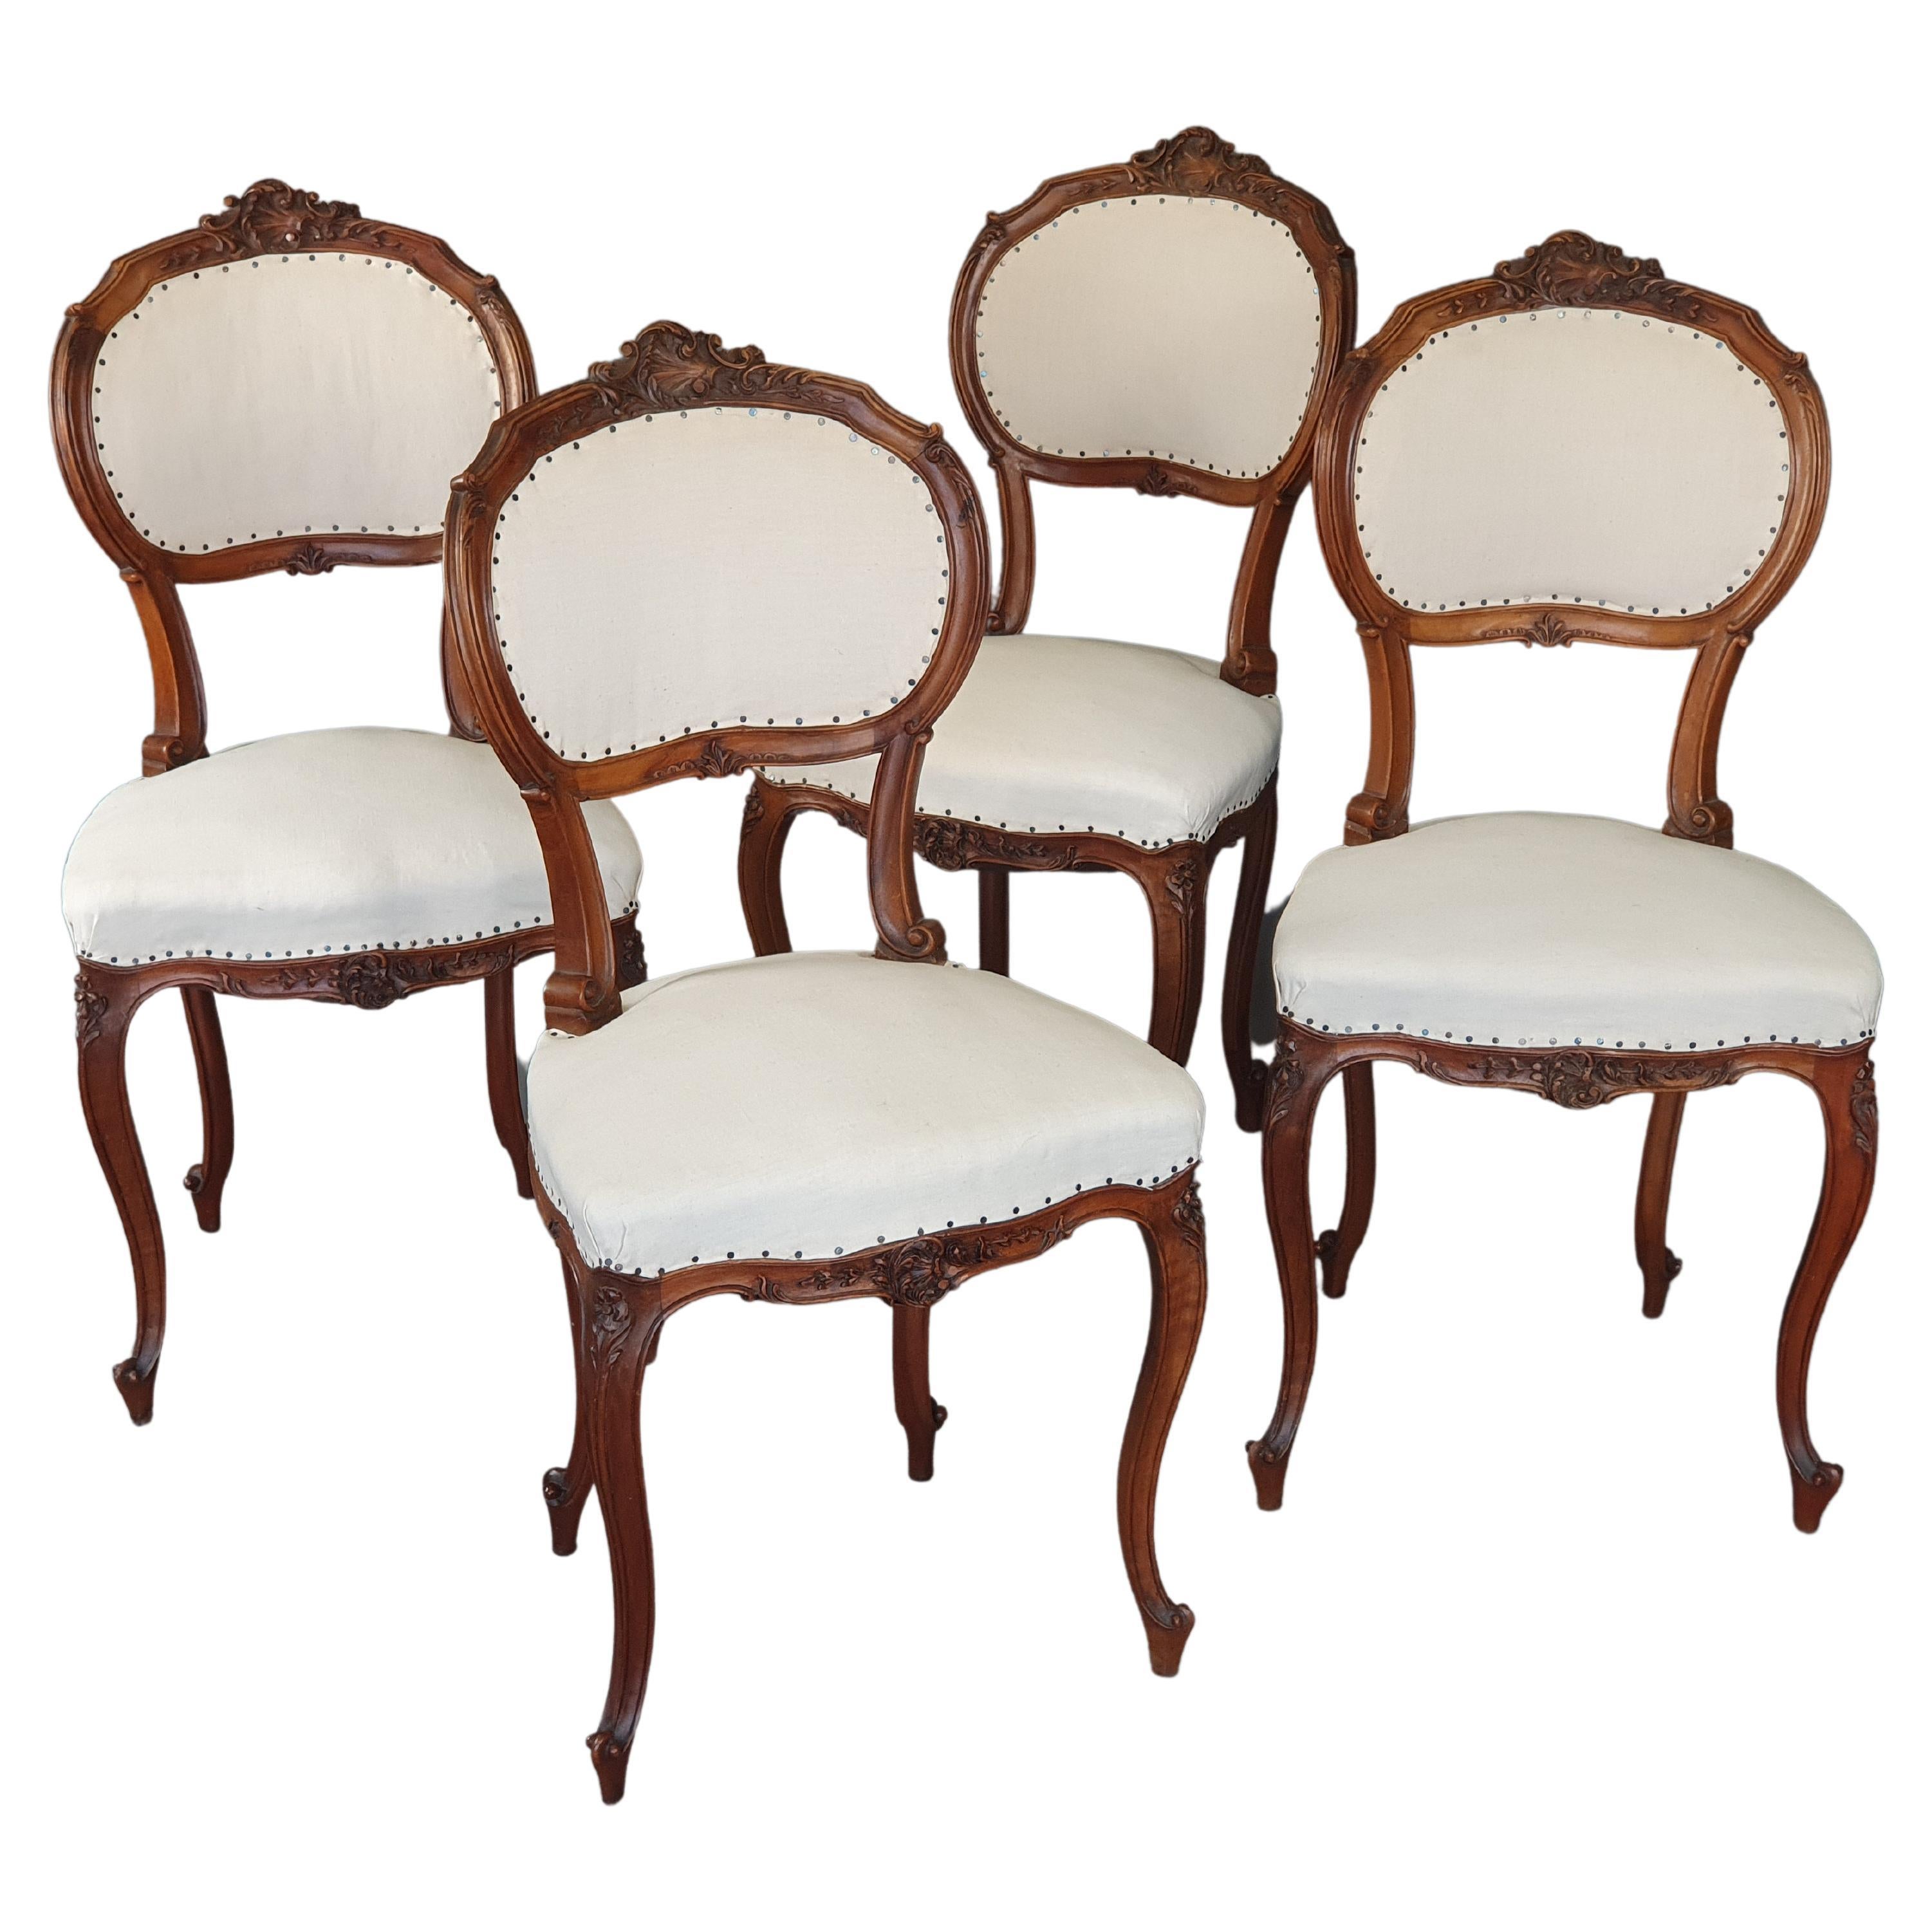 Suite of Four Louis XV Rocaille Chairs